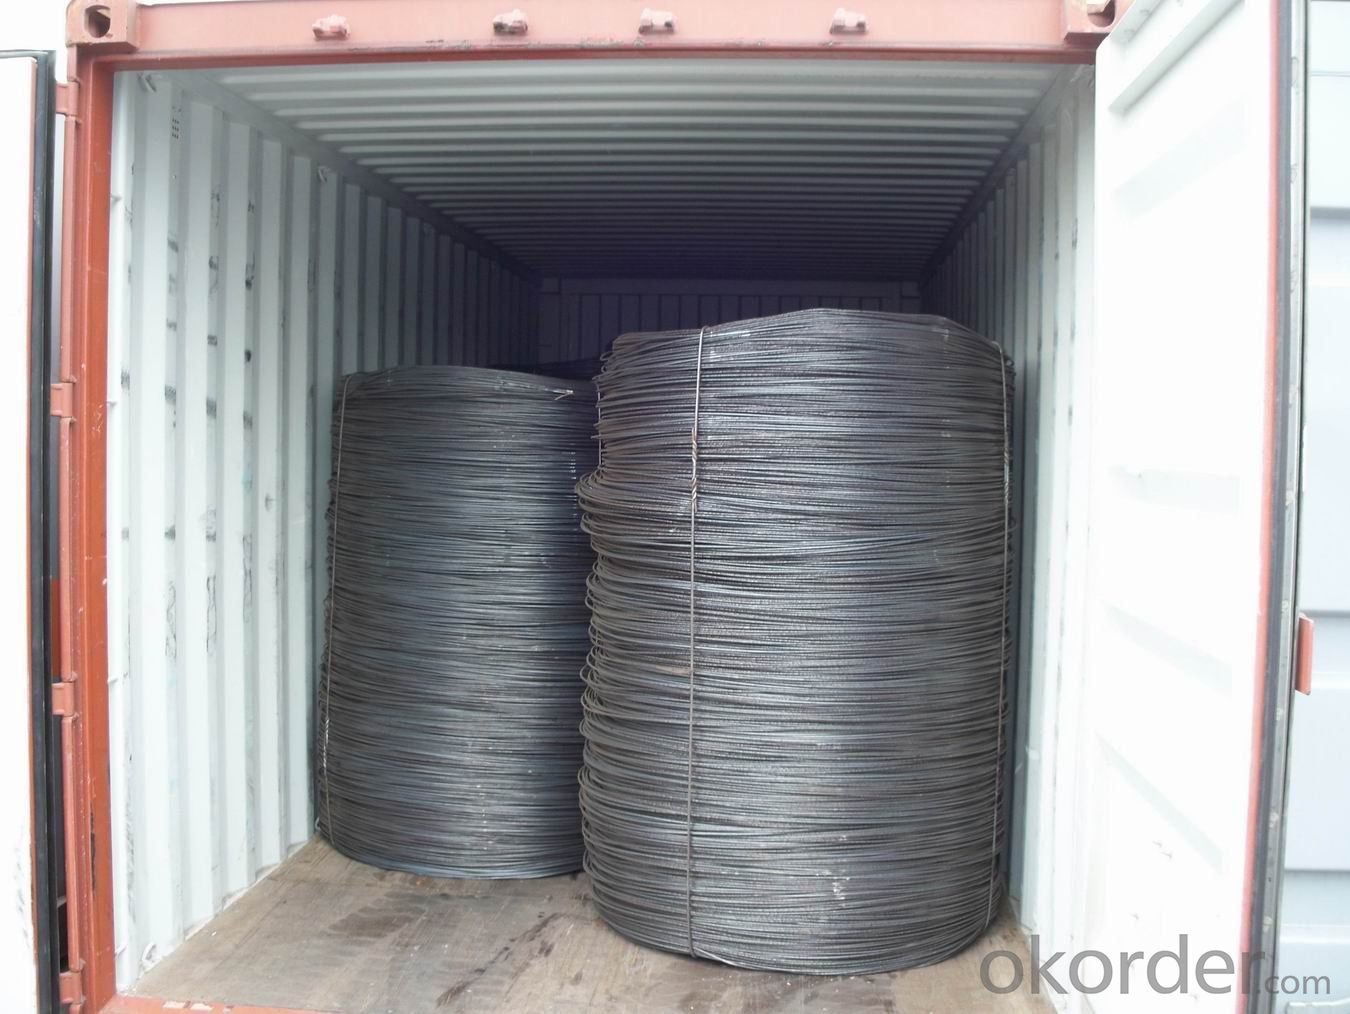 SAE1006Cr Carbon Steel Wire Rod 10mm for Welding